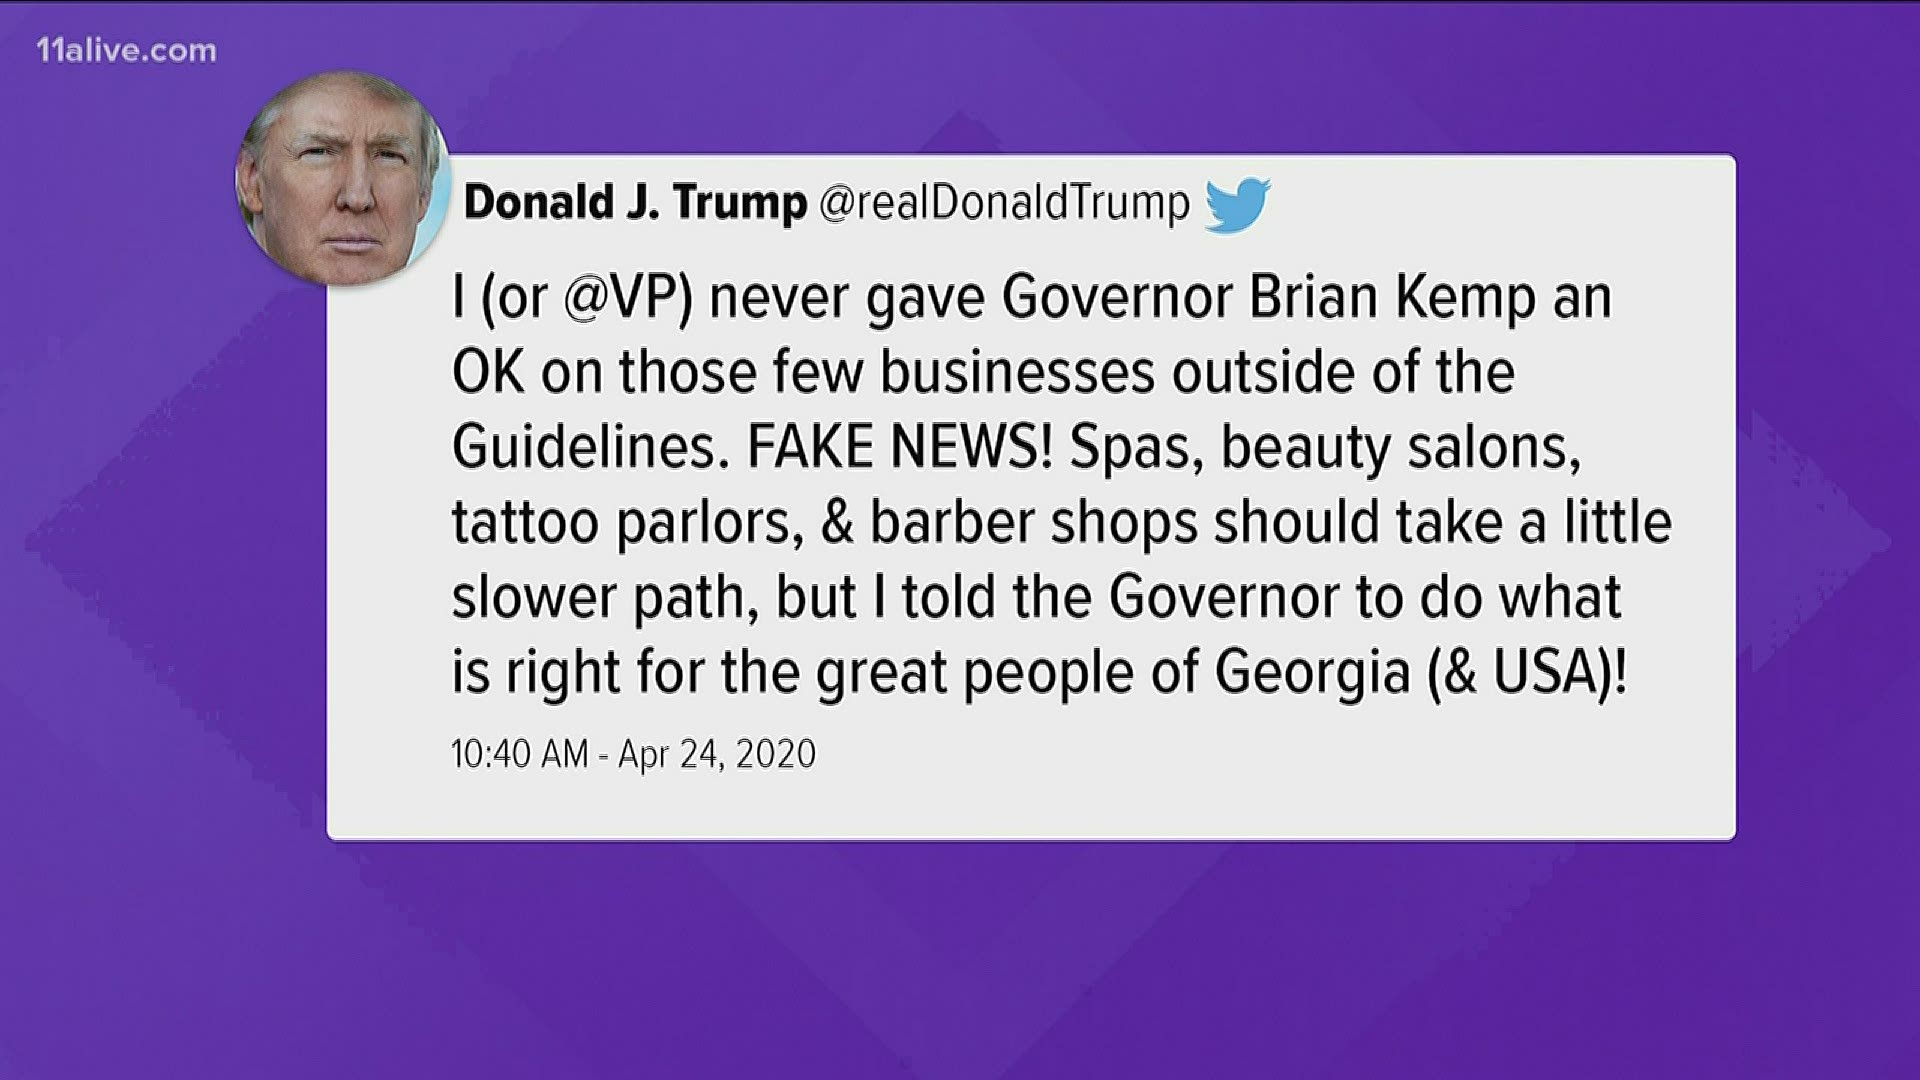 The president said Thursday he "wasn't happy" with Georgia Gov. Brian Kemp over the state's reopening.